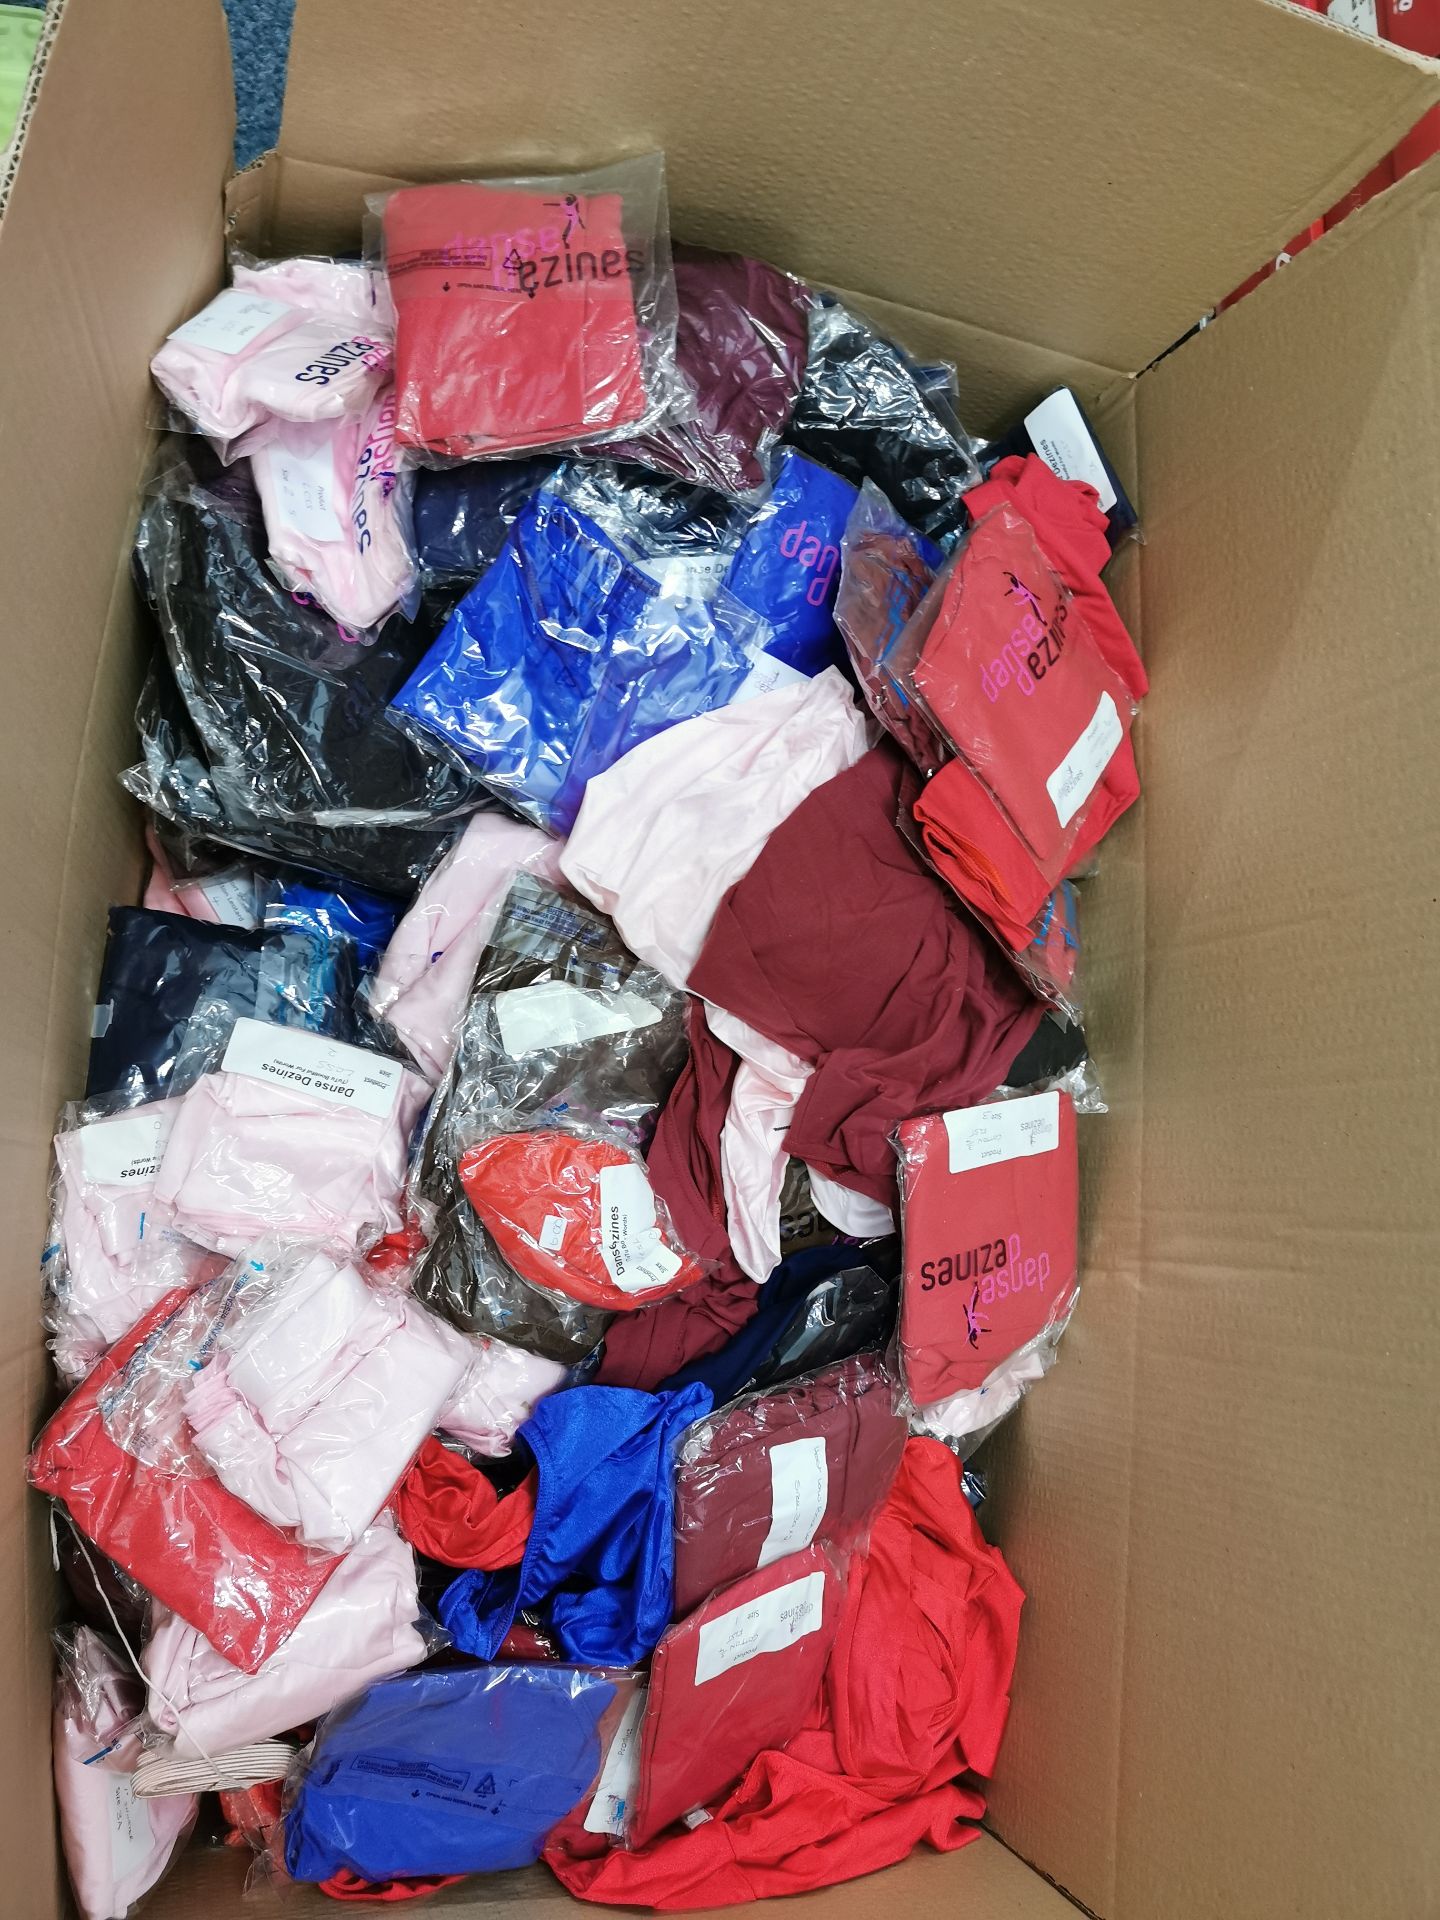 Massive job lot, estimated 1000+ childrens clothes in a variety of colours and sizes